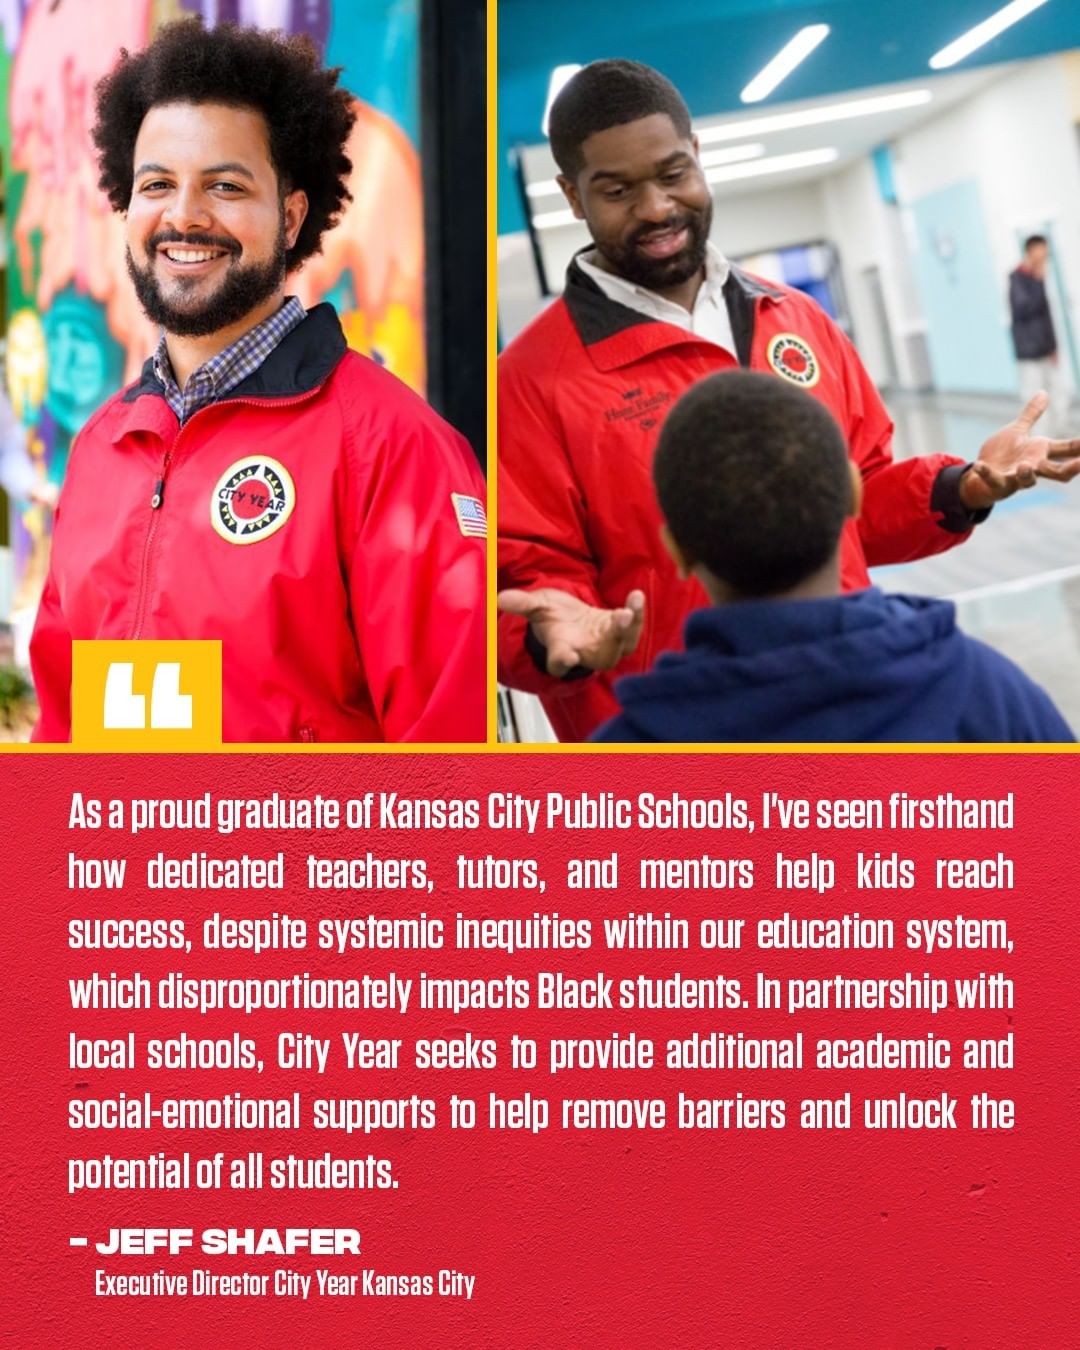 Unlocking the potential of all students #BHM 
To learn more about how Jeff and ...